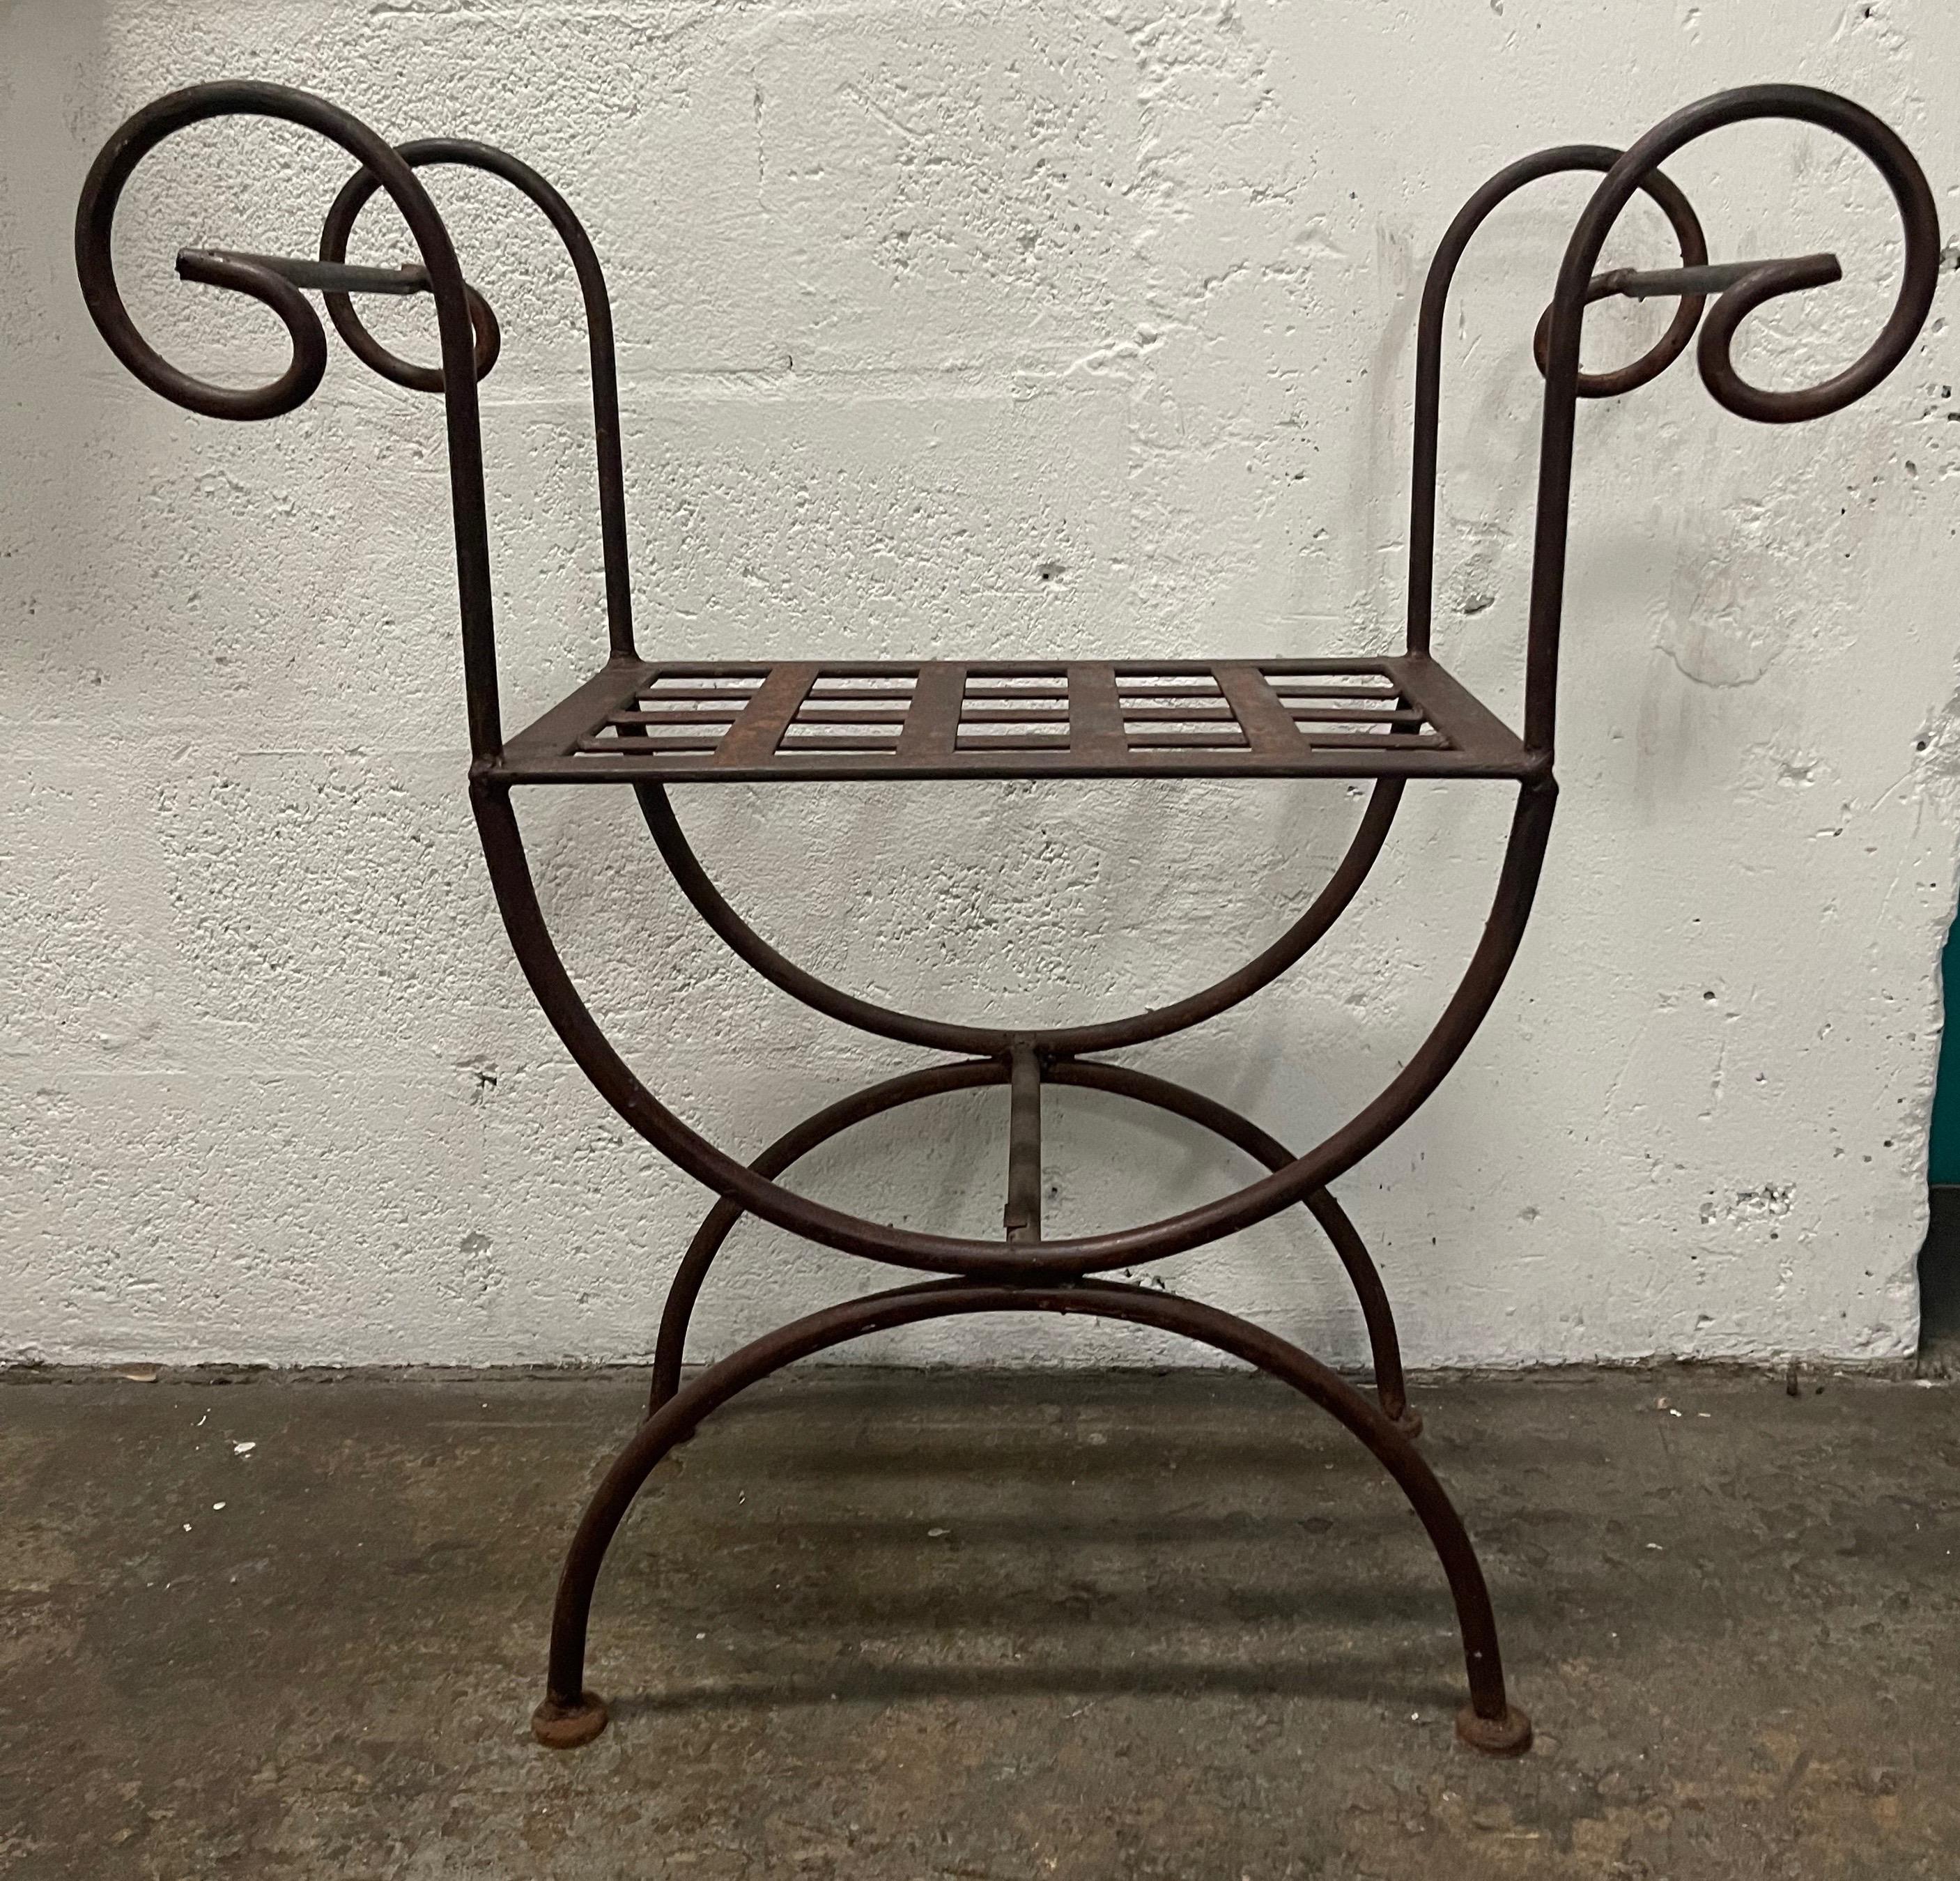 Curule style naturally patinated iron bench with curved arms & lattice seat.